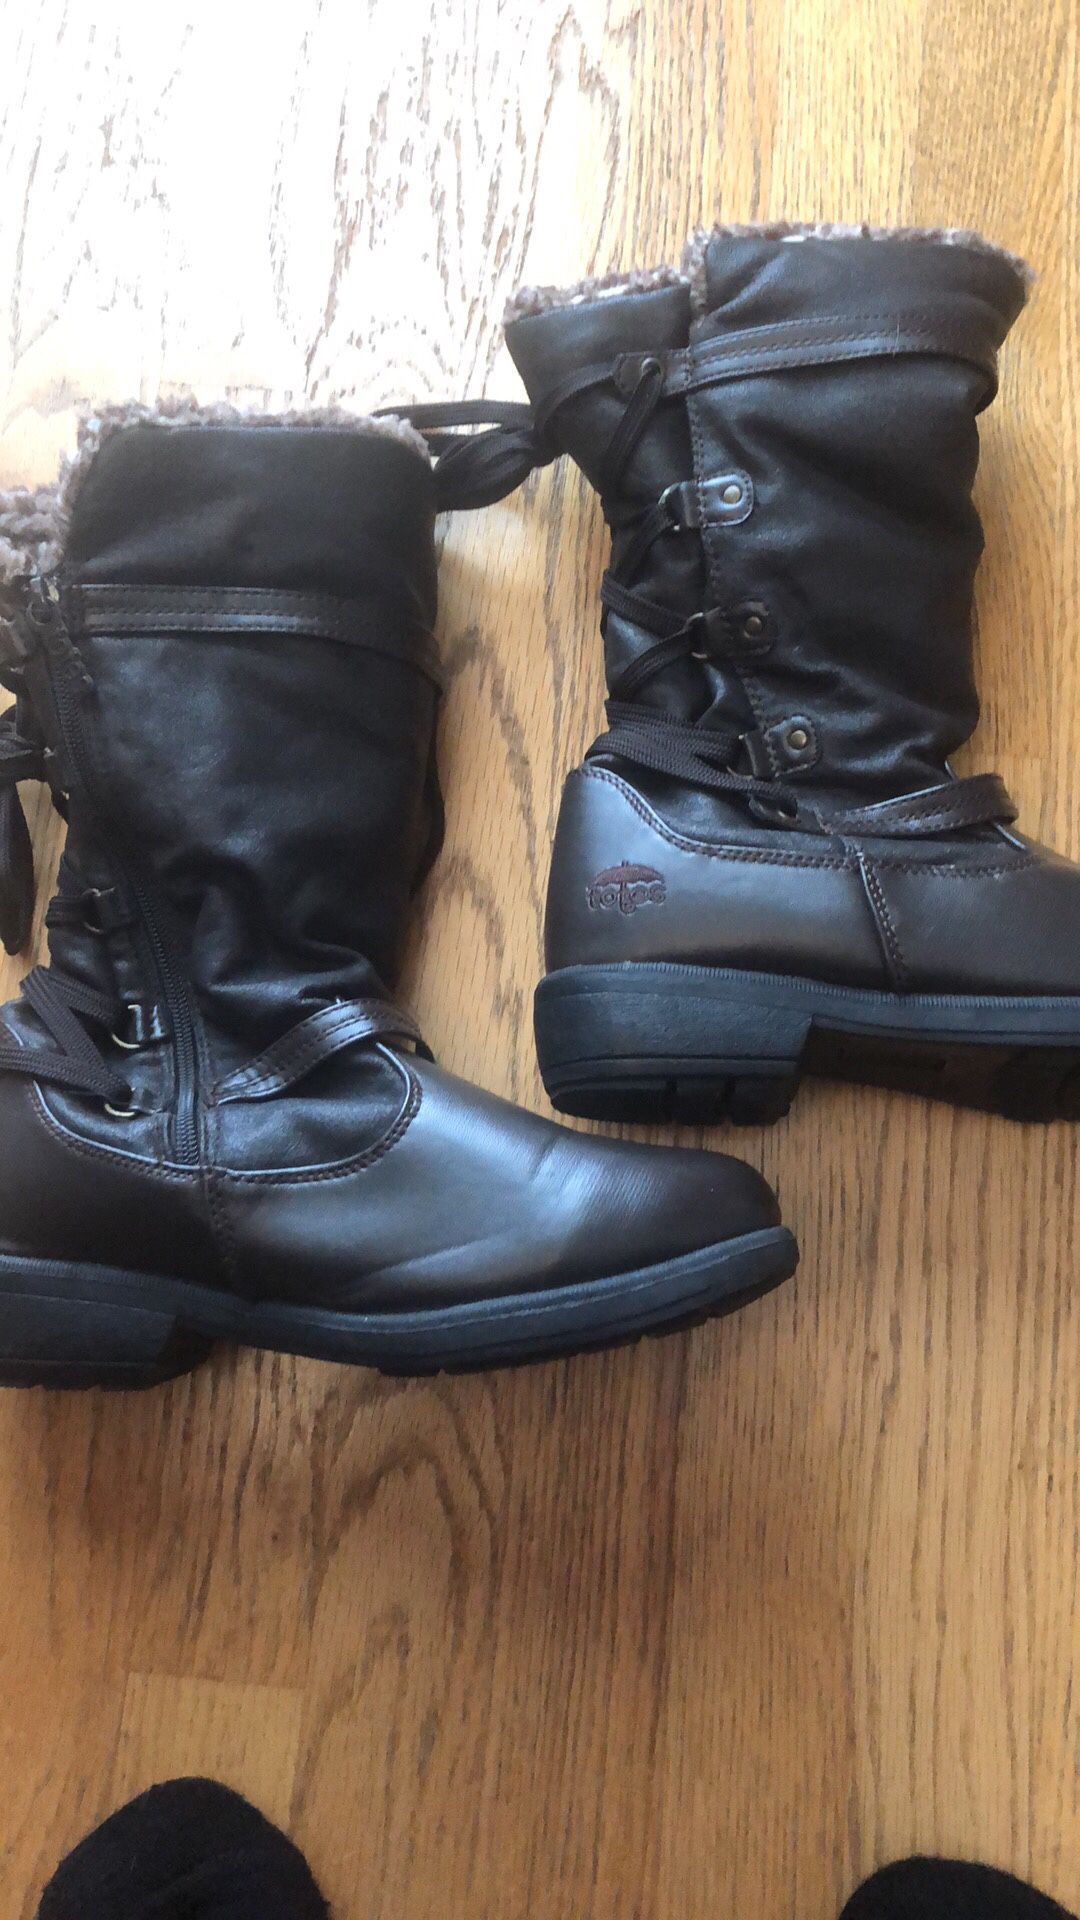 Totes brand ladies winter boots, Size 9